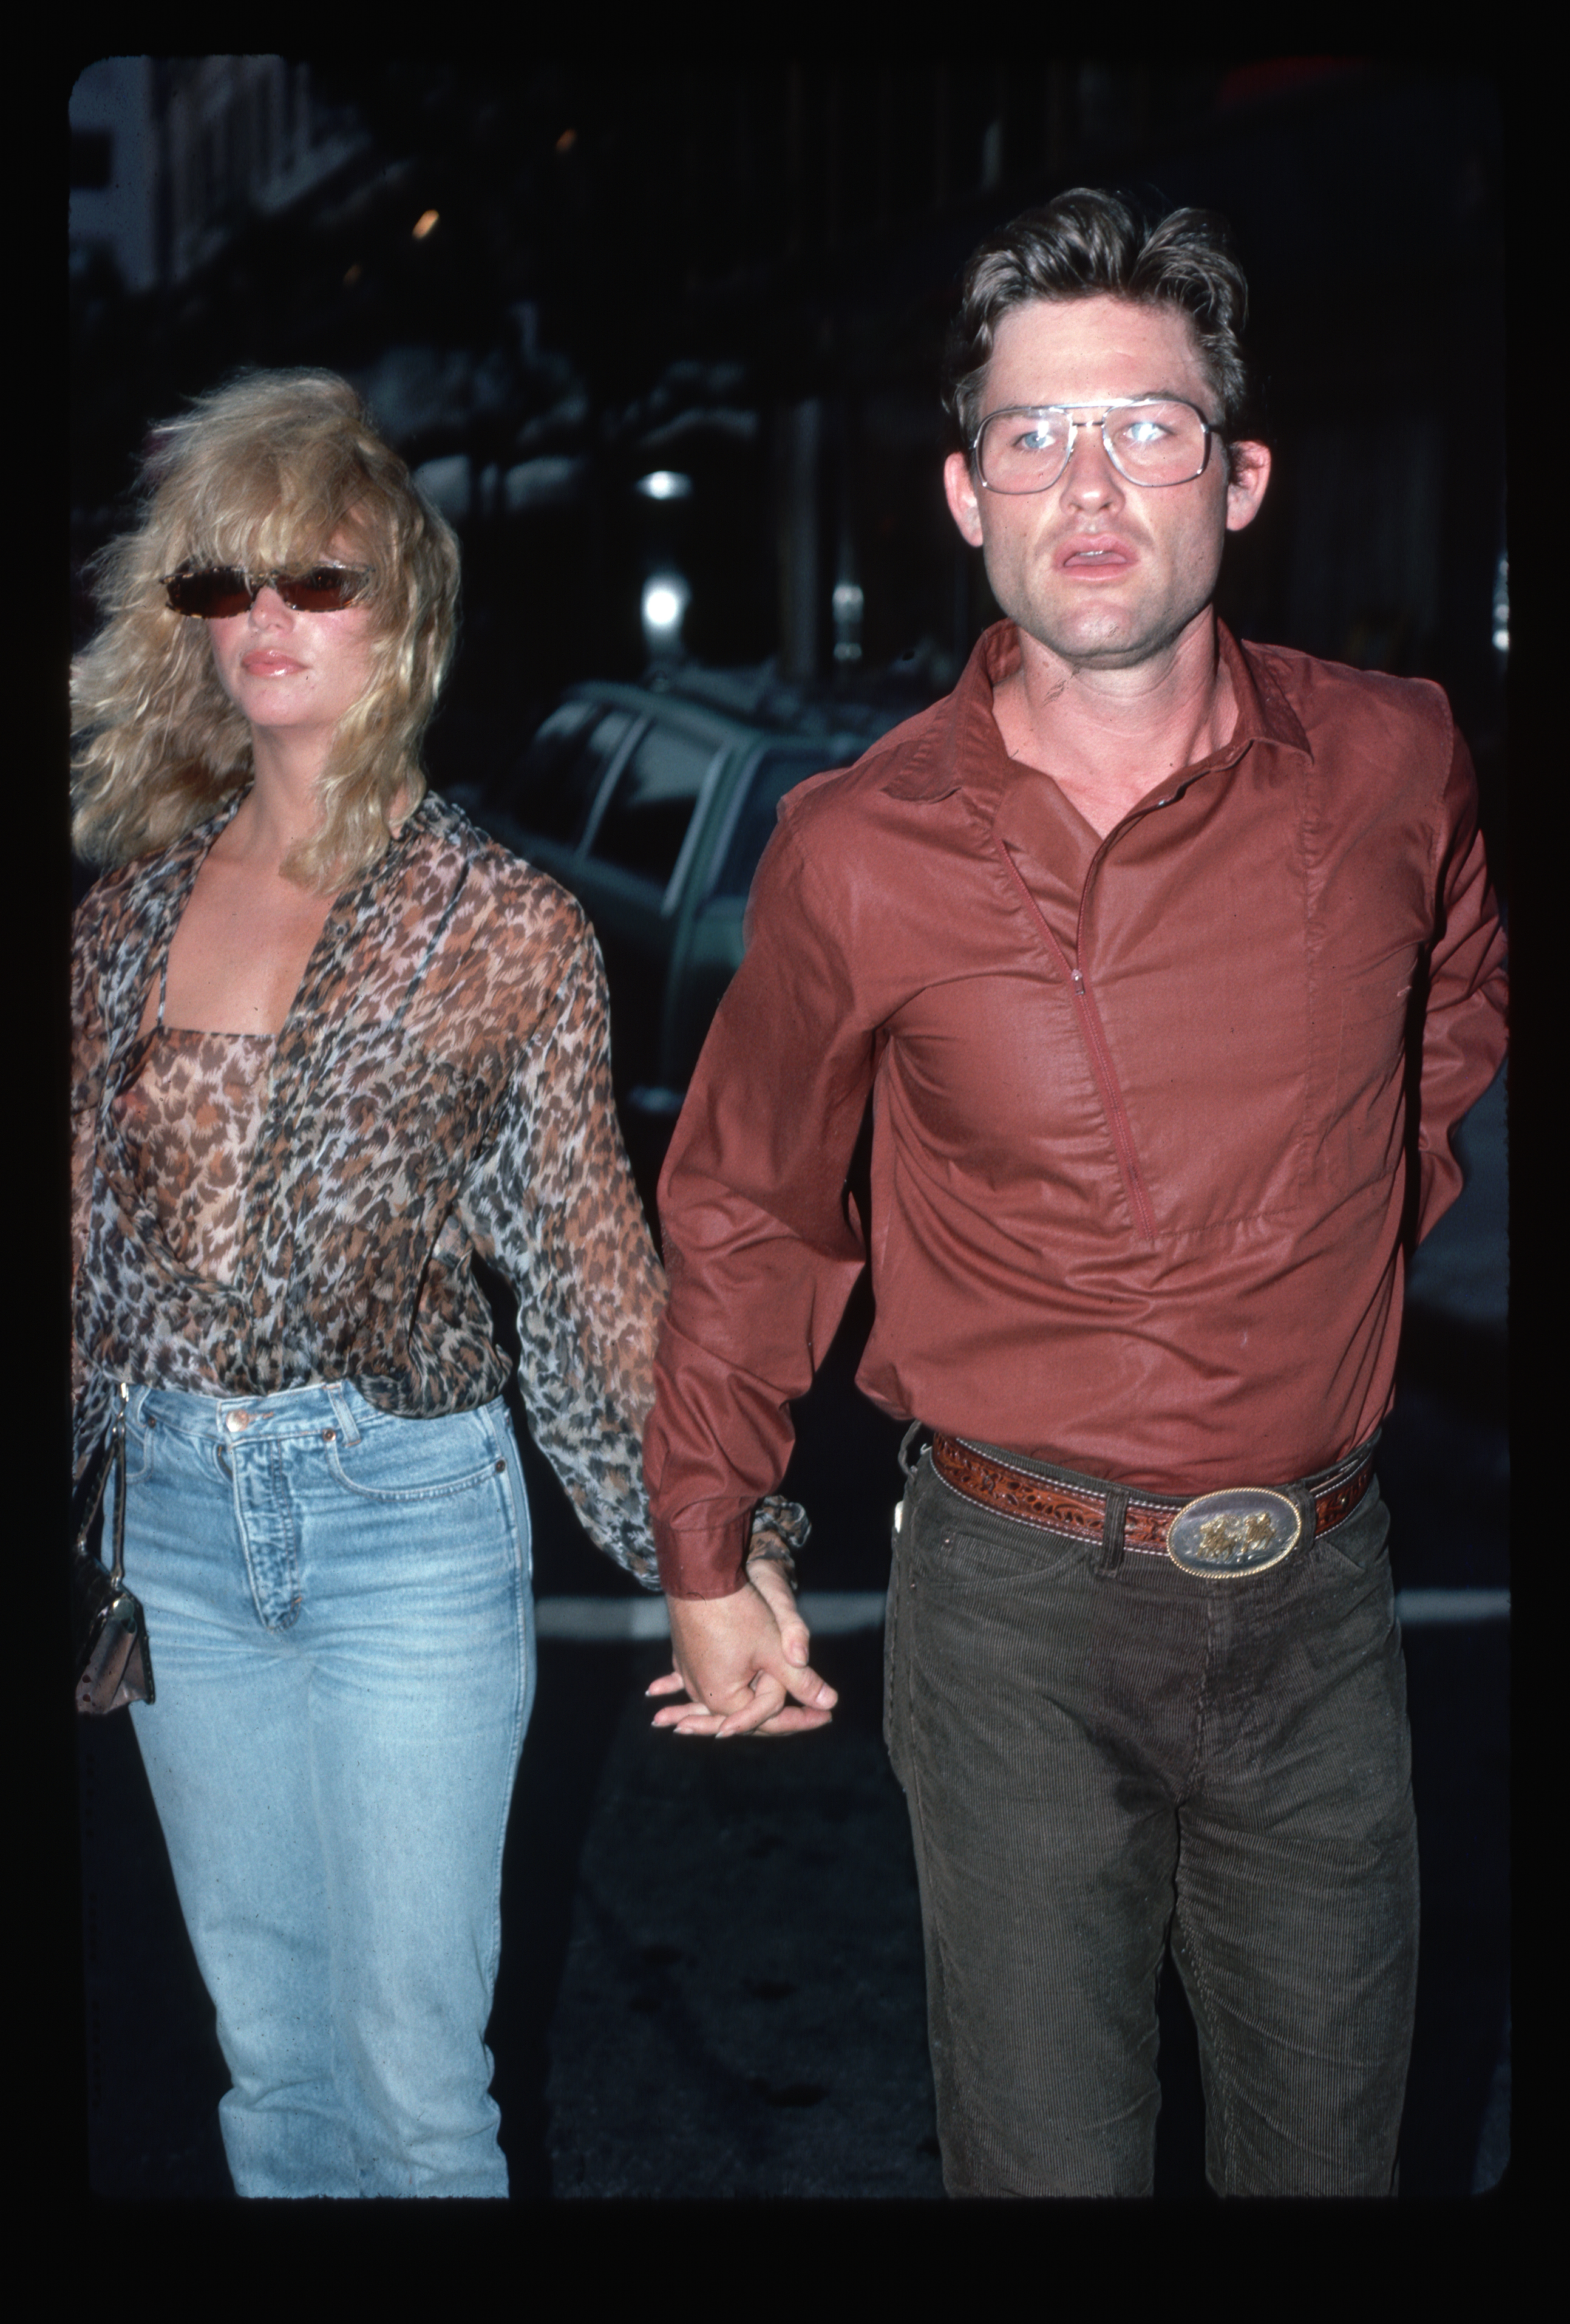 An undated photo of Goldie Hawn and Kurt Russell pictured holding hands outdoors at night | Source: Getty Images